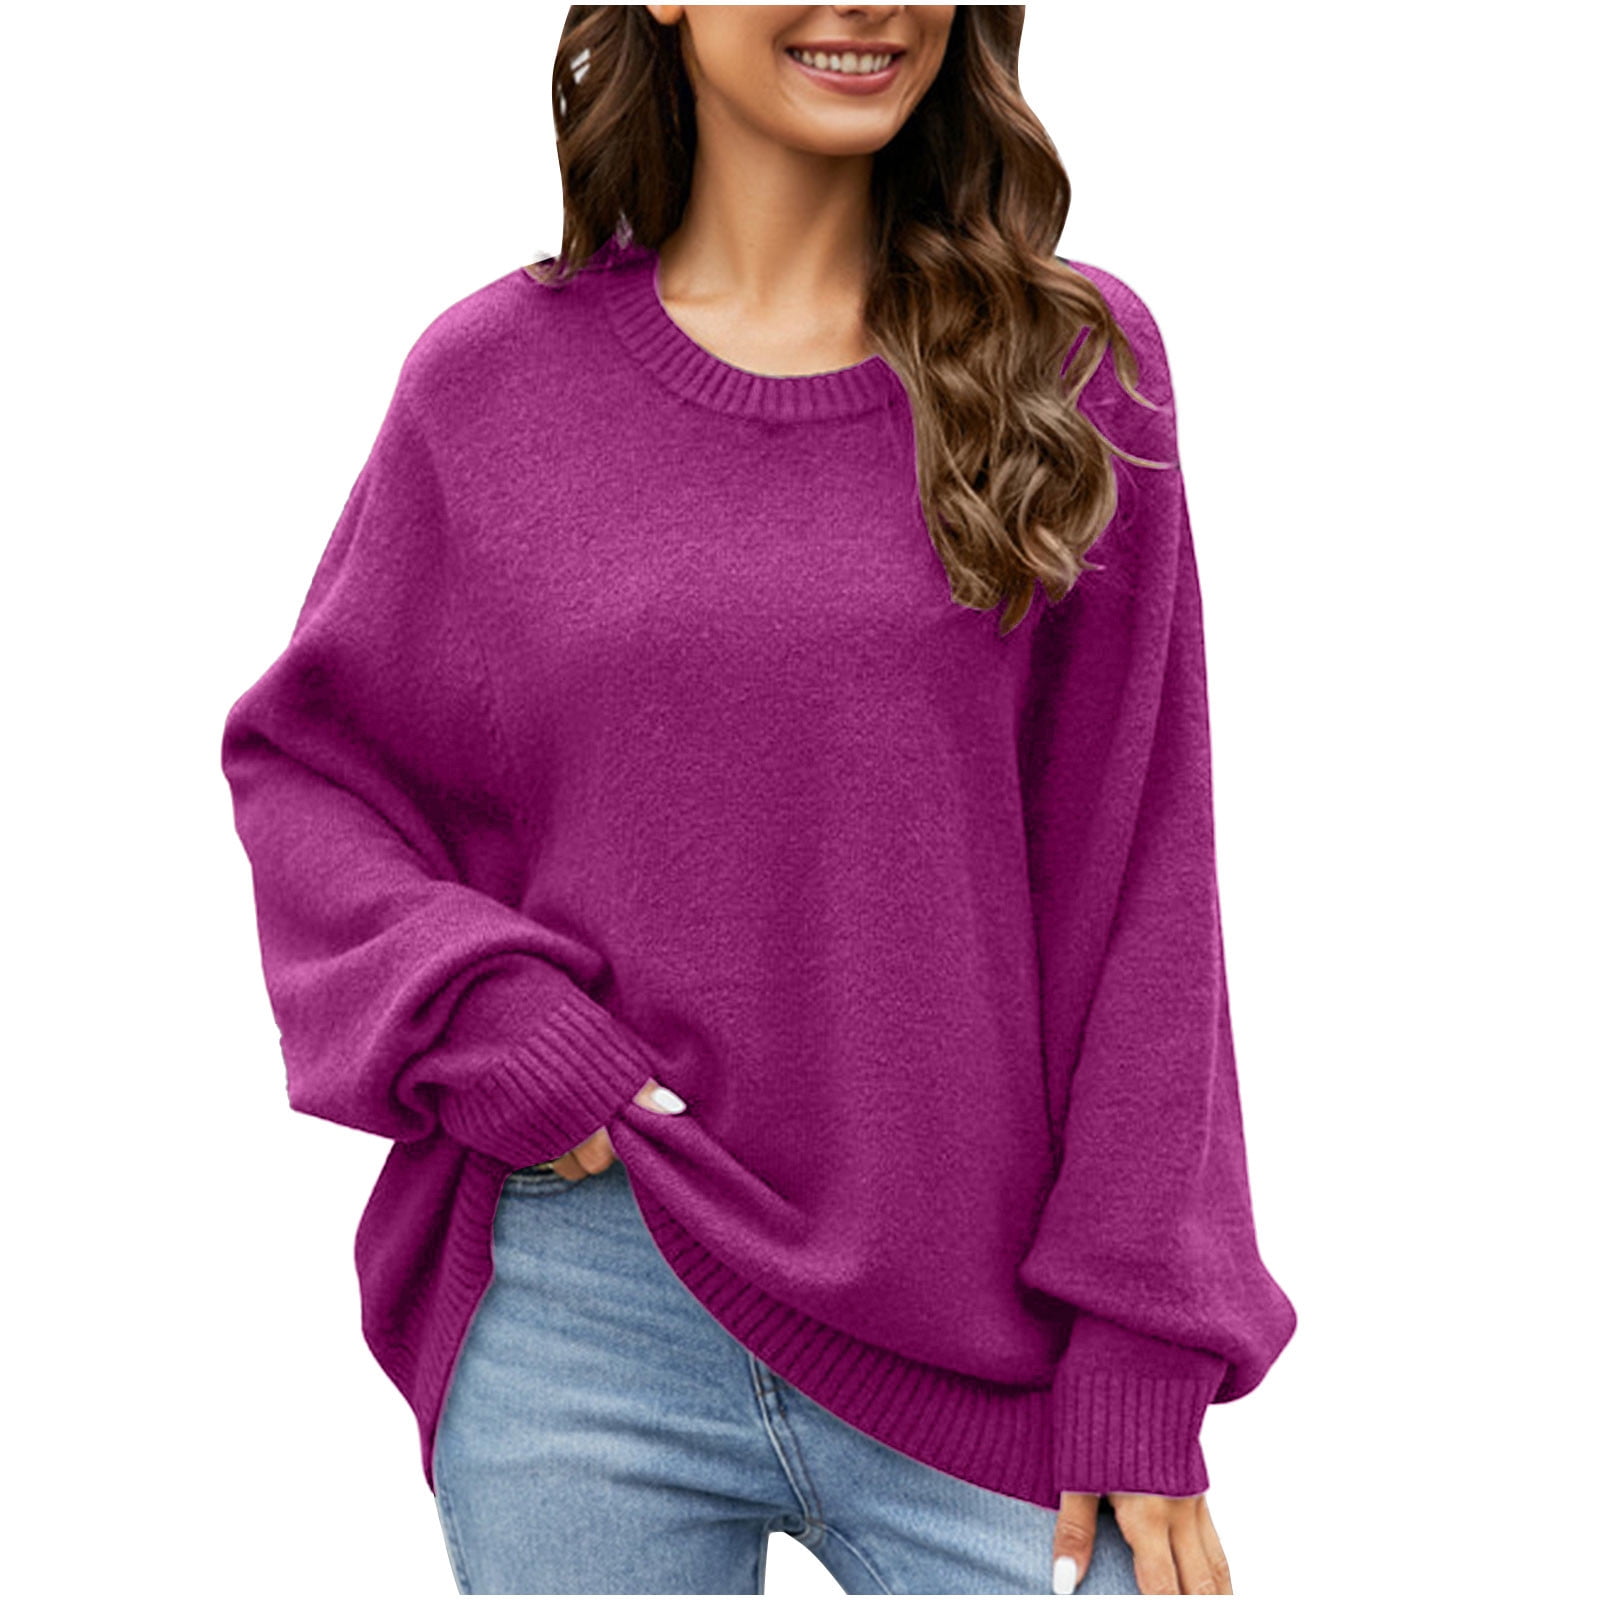 Womens Oversized Sweaters Crew Neck Loose Comfy Knitted Pullover Top ...